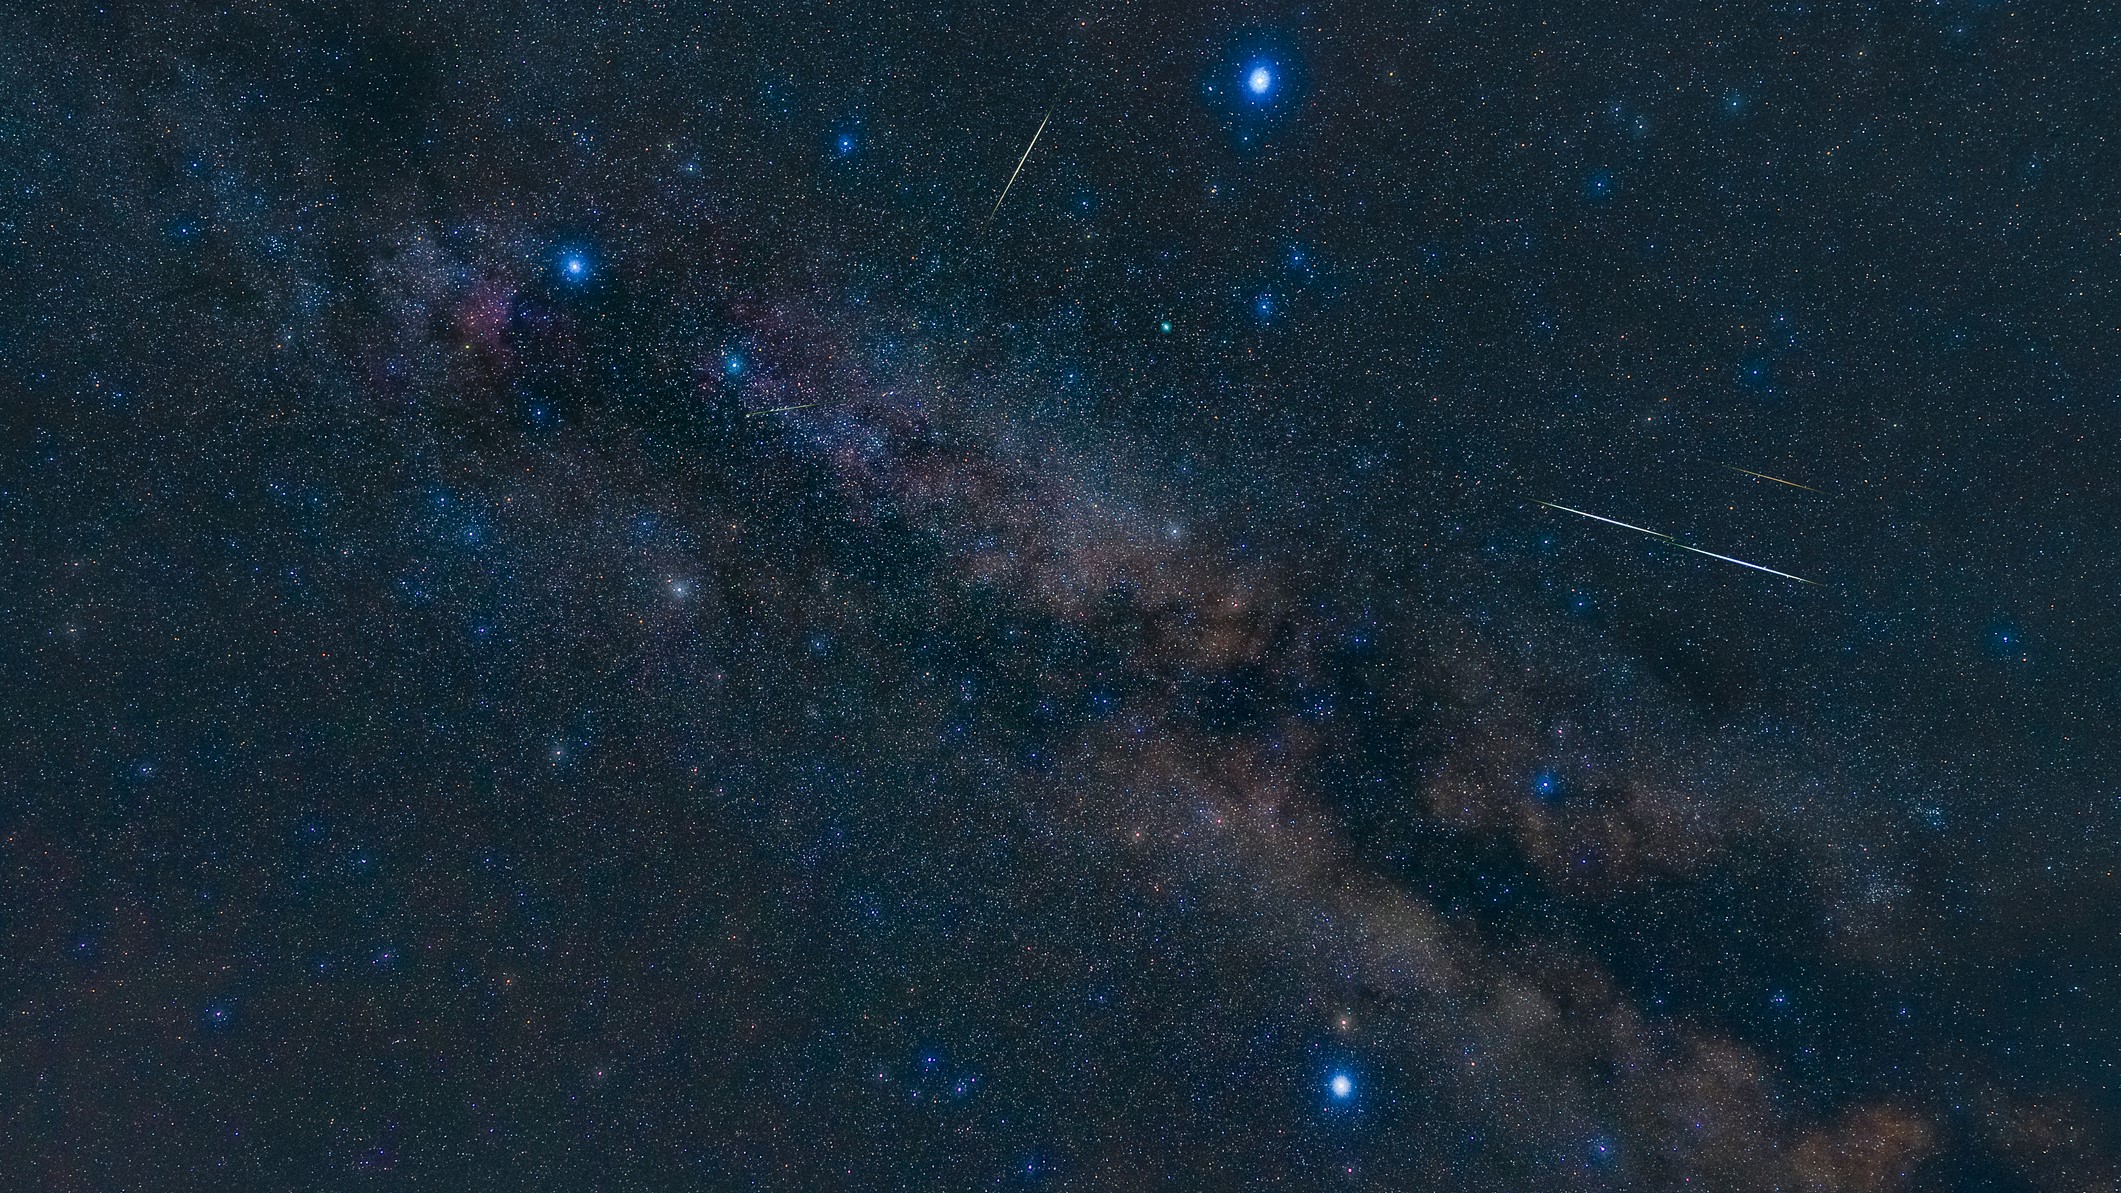 Three bright stars are arranged in a triangle formation in the night sky.  Some meteor streaks are visible across the image and the Milky Way stretches across the backdround.